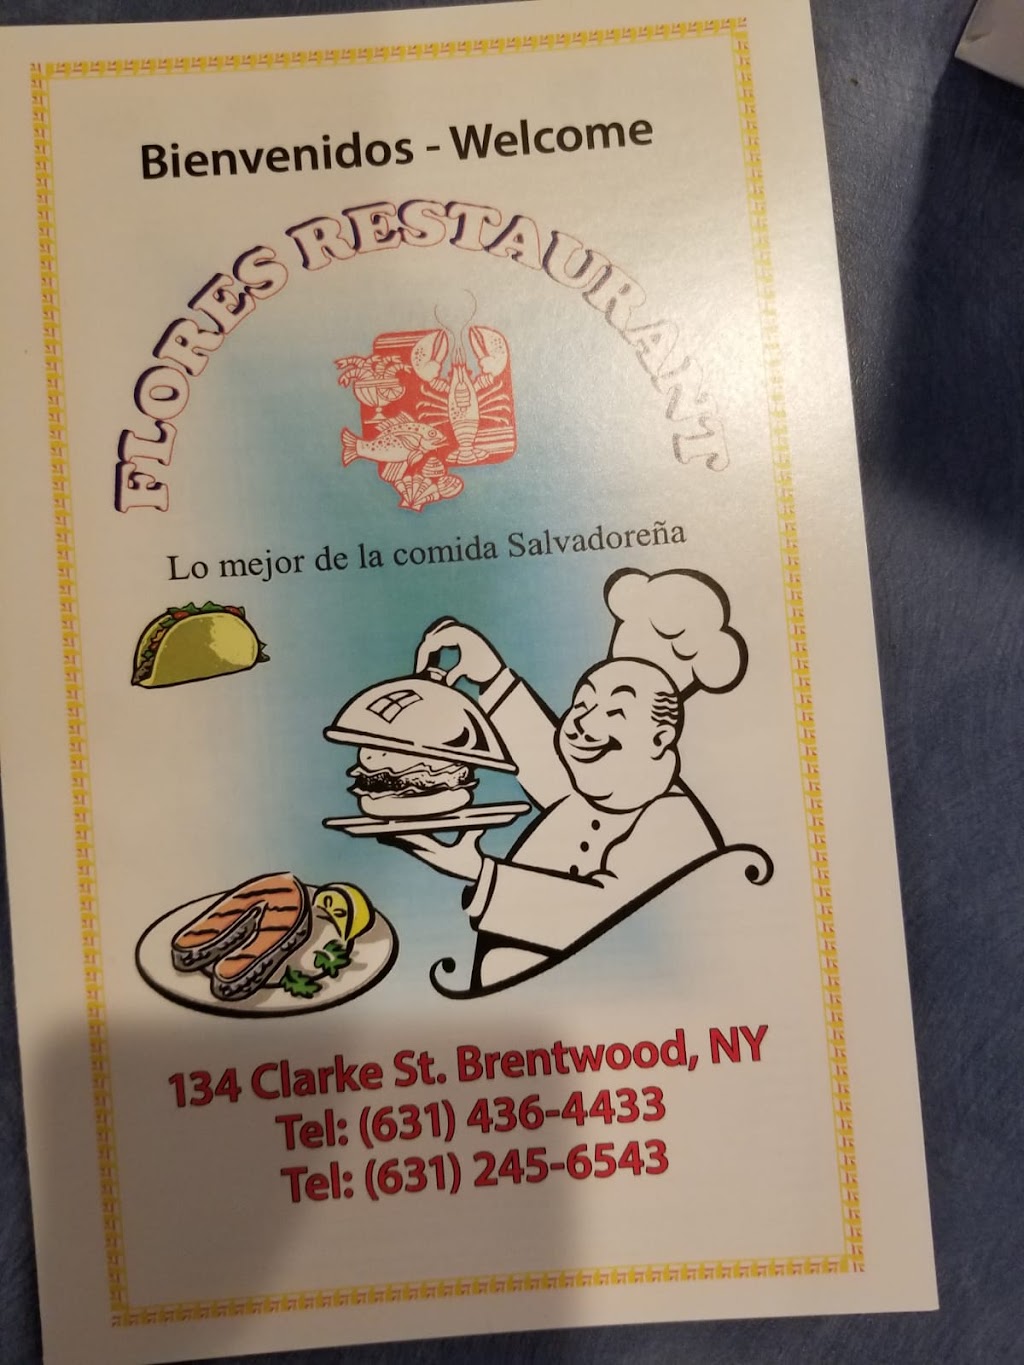 Flores Restaurant | 134 Clarke St, Brentwood, NY 11717 | Phone: (631) 436-4433